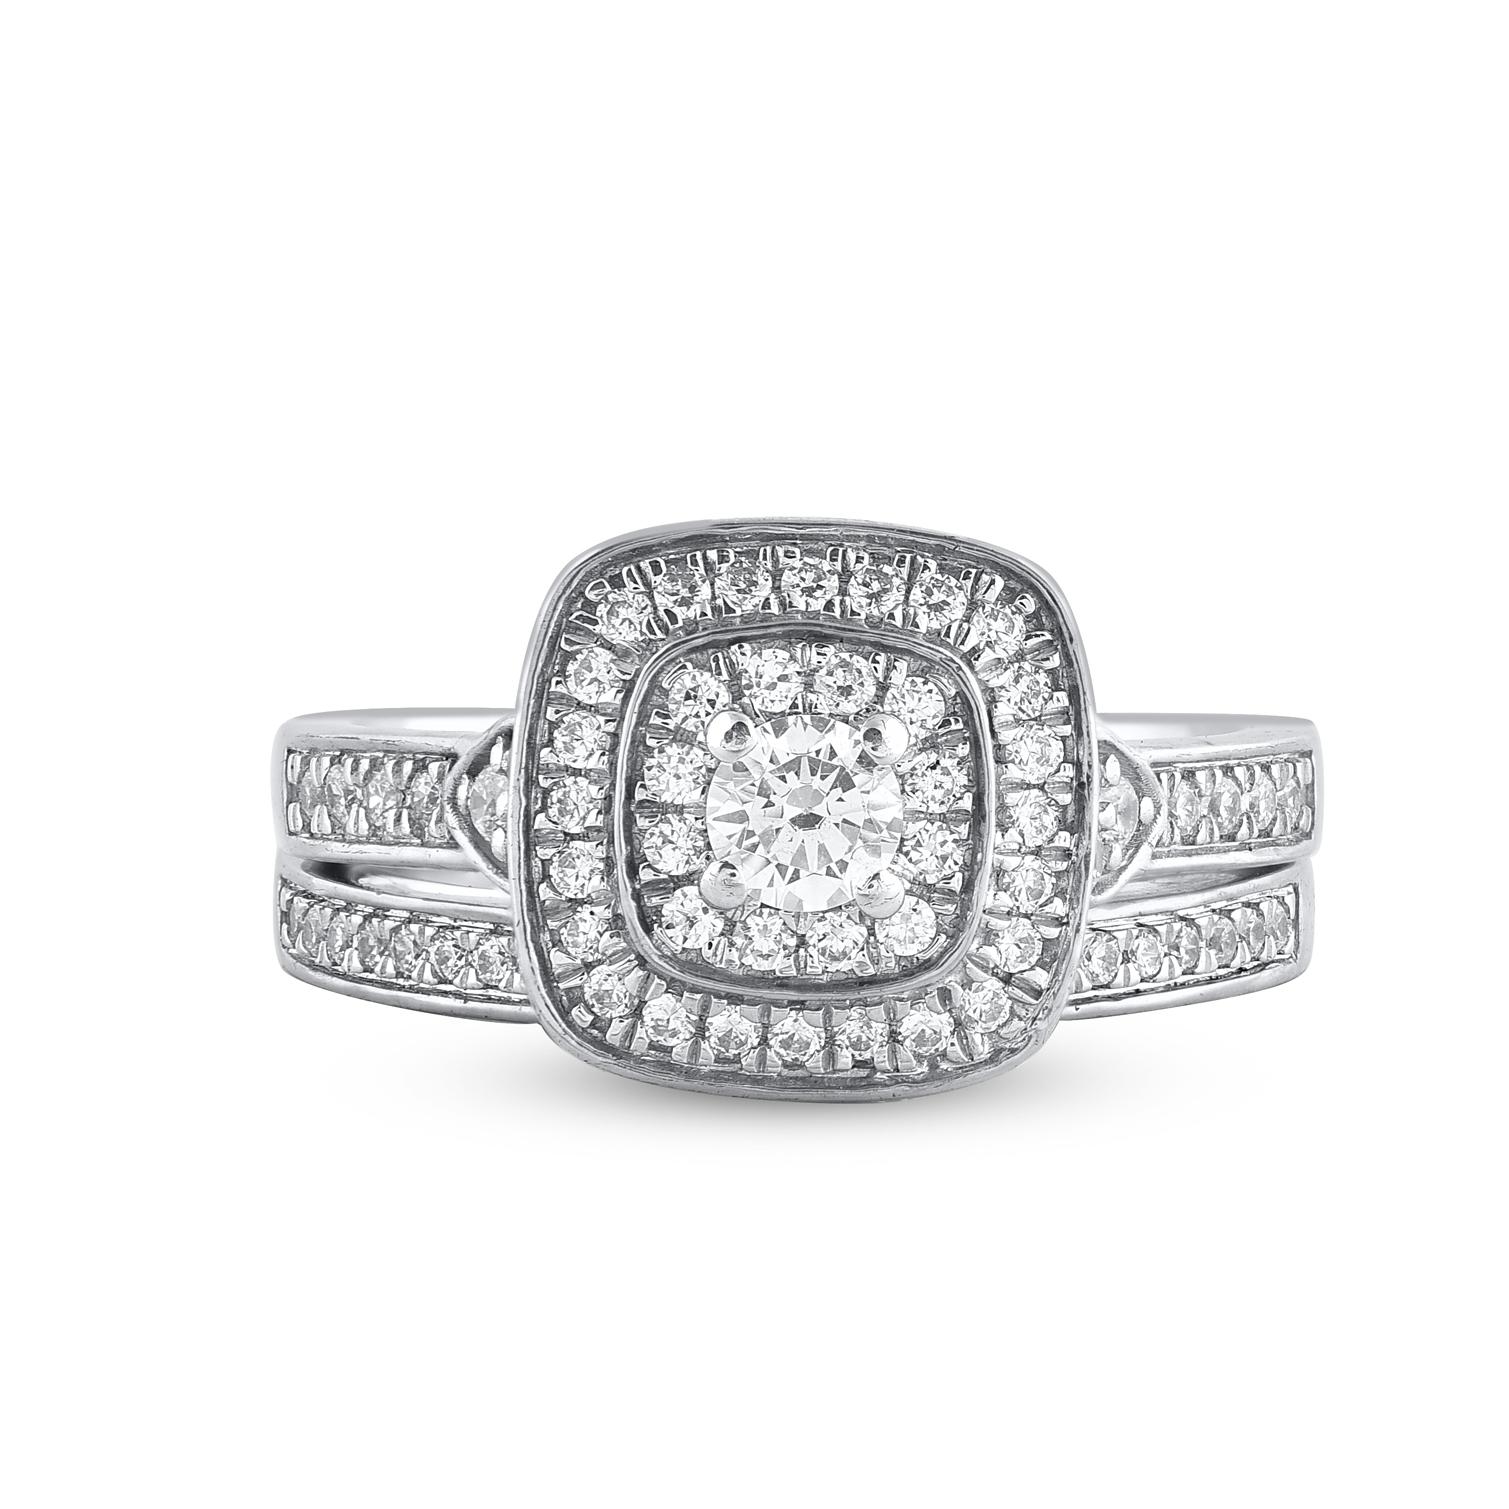 Express your love with this classic and traditional diamond bridal set. Crafted in 14 Karat white gold. This wedding ring features a sparkling 74 brilliant cut and single cut round diamonds beautifully set in pave setting. The total diamond weight